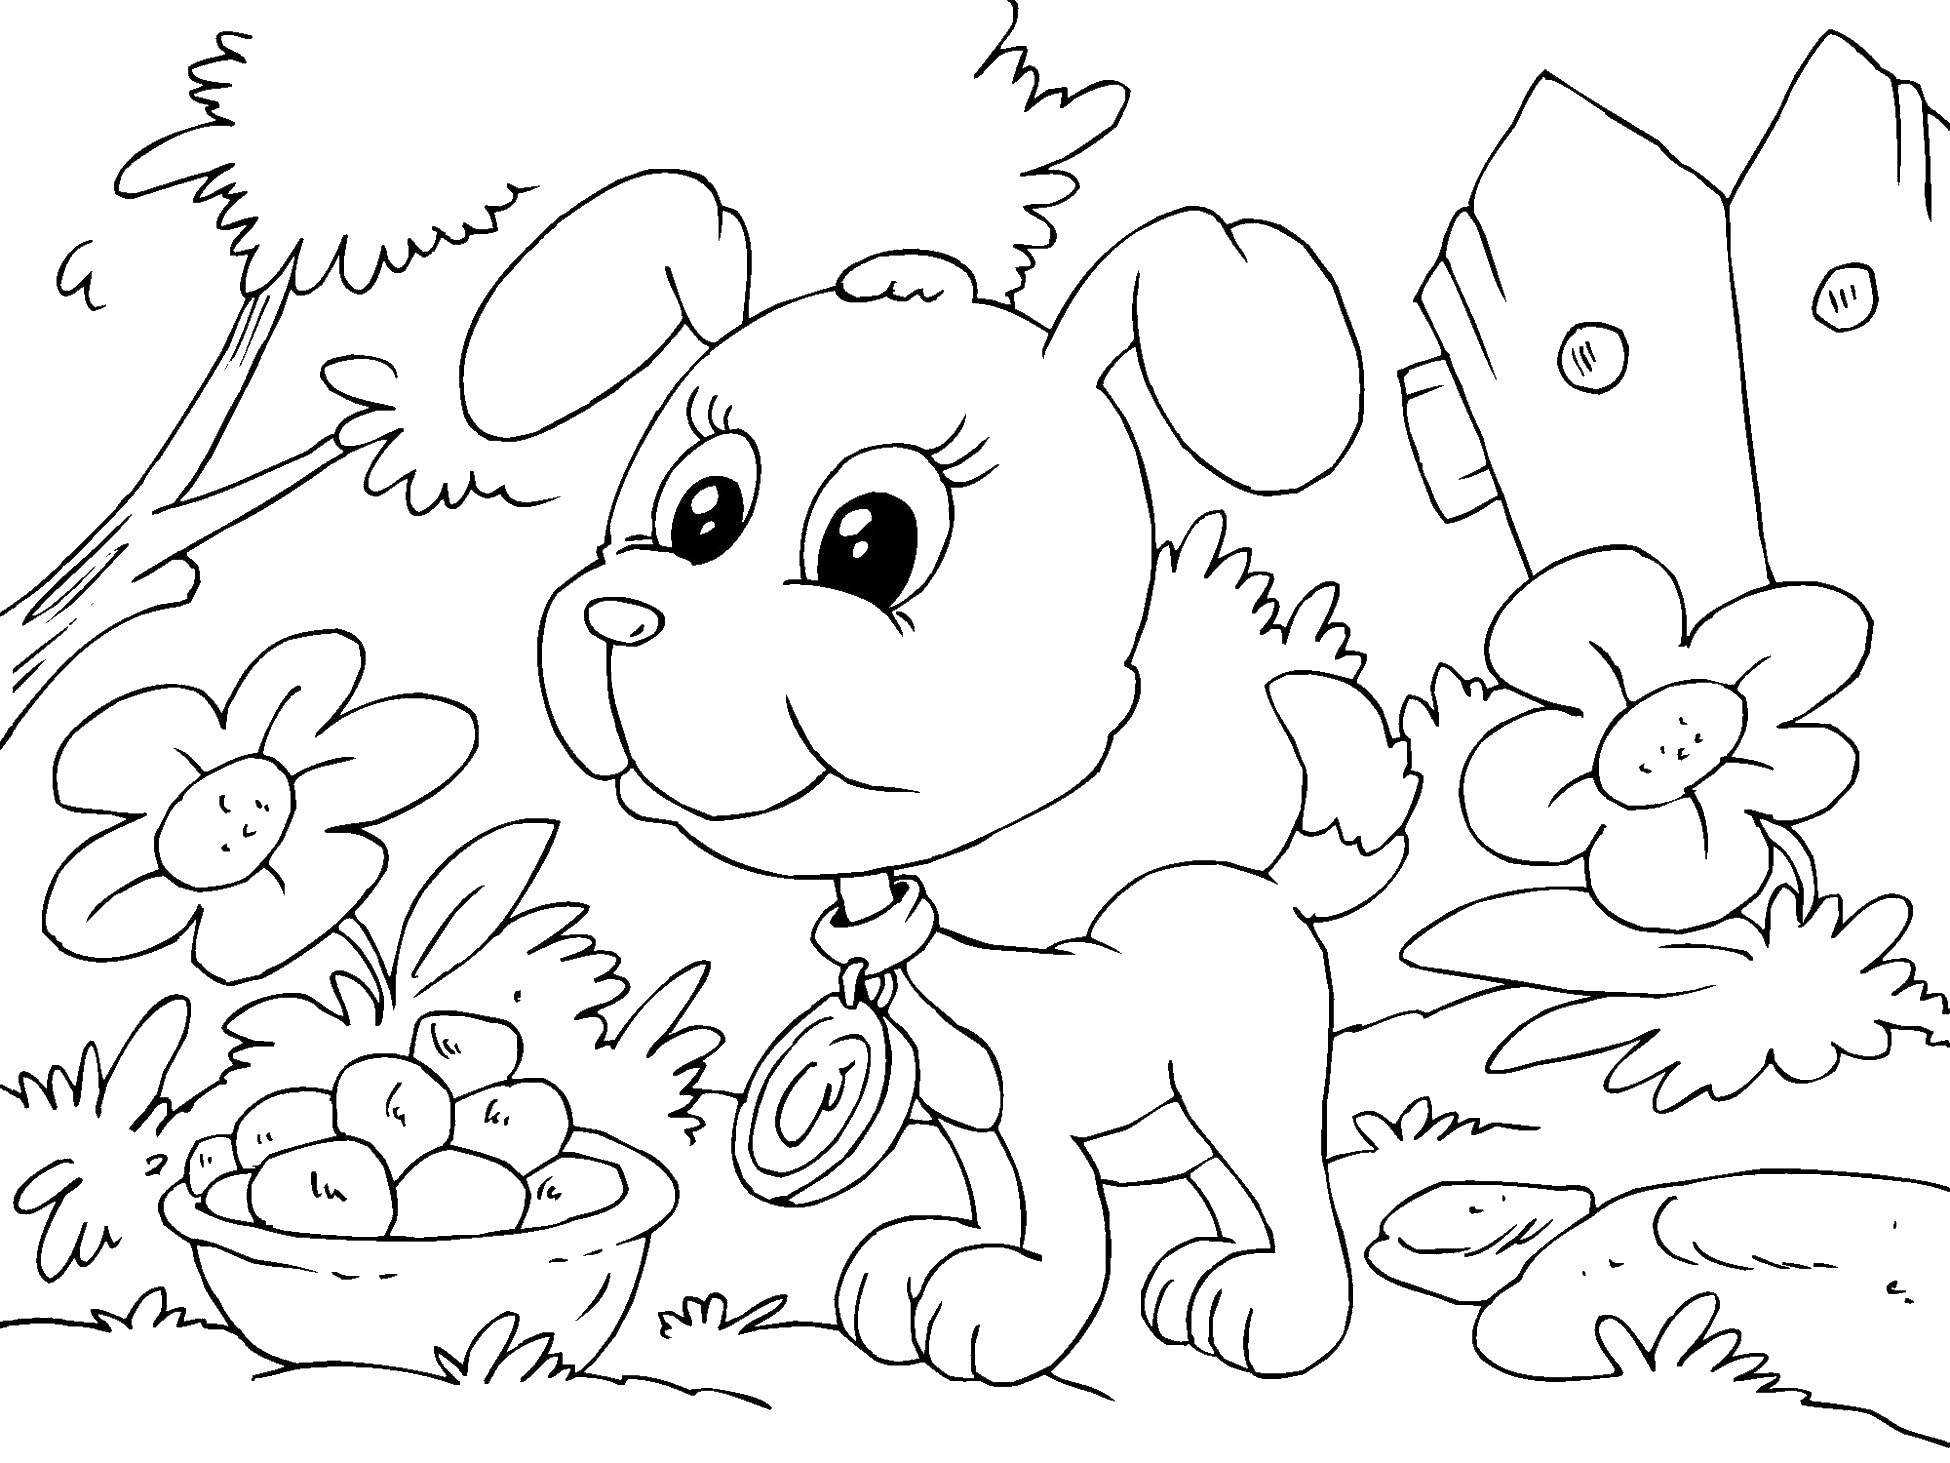 Coloring A bowl of dog. Category Pets allowed. Tags:  Animals, dog.